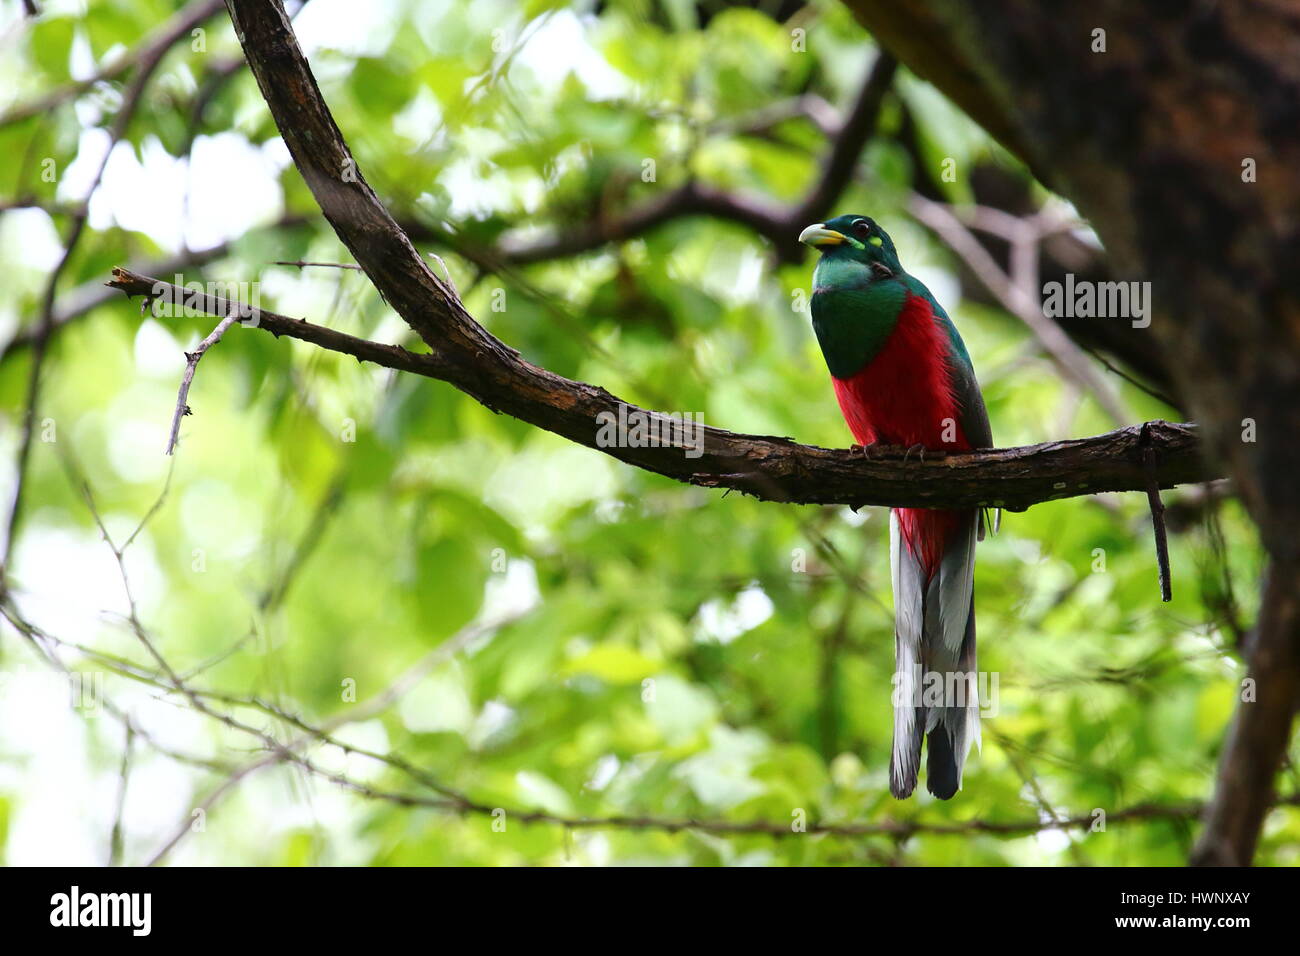 Male Narina Trogon, Apaloderma narina, singing to show turquoise throat patch, in the thickets of the Zambezi Valley, Zambia, Africa Stock Photo